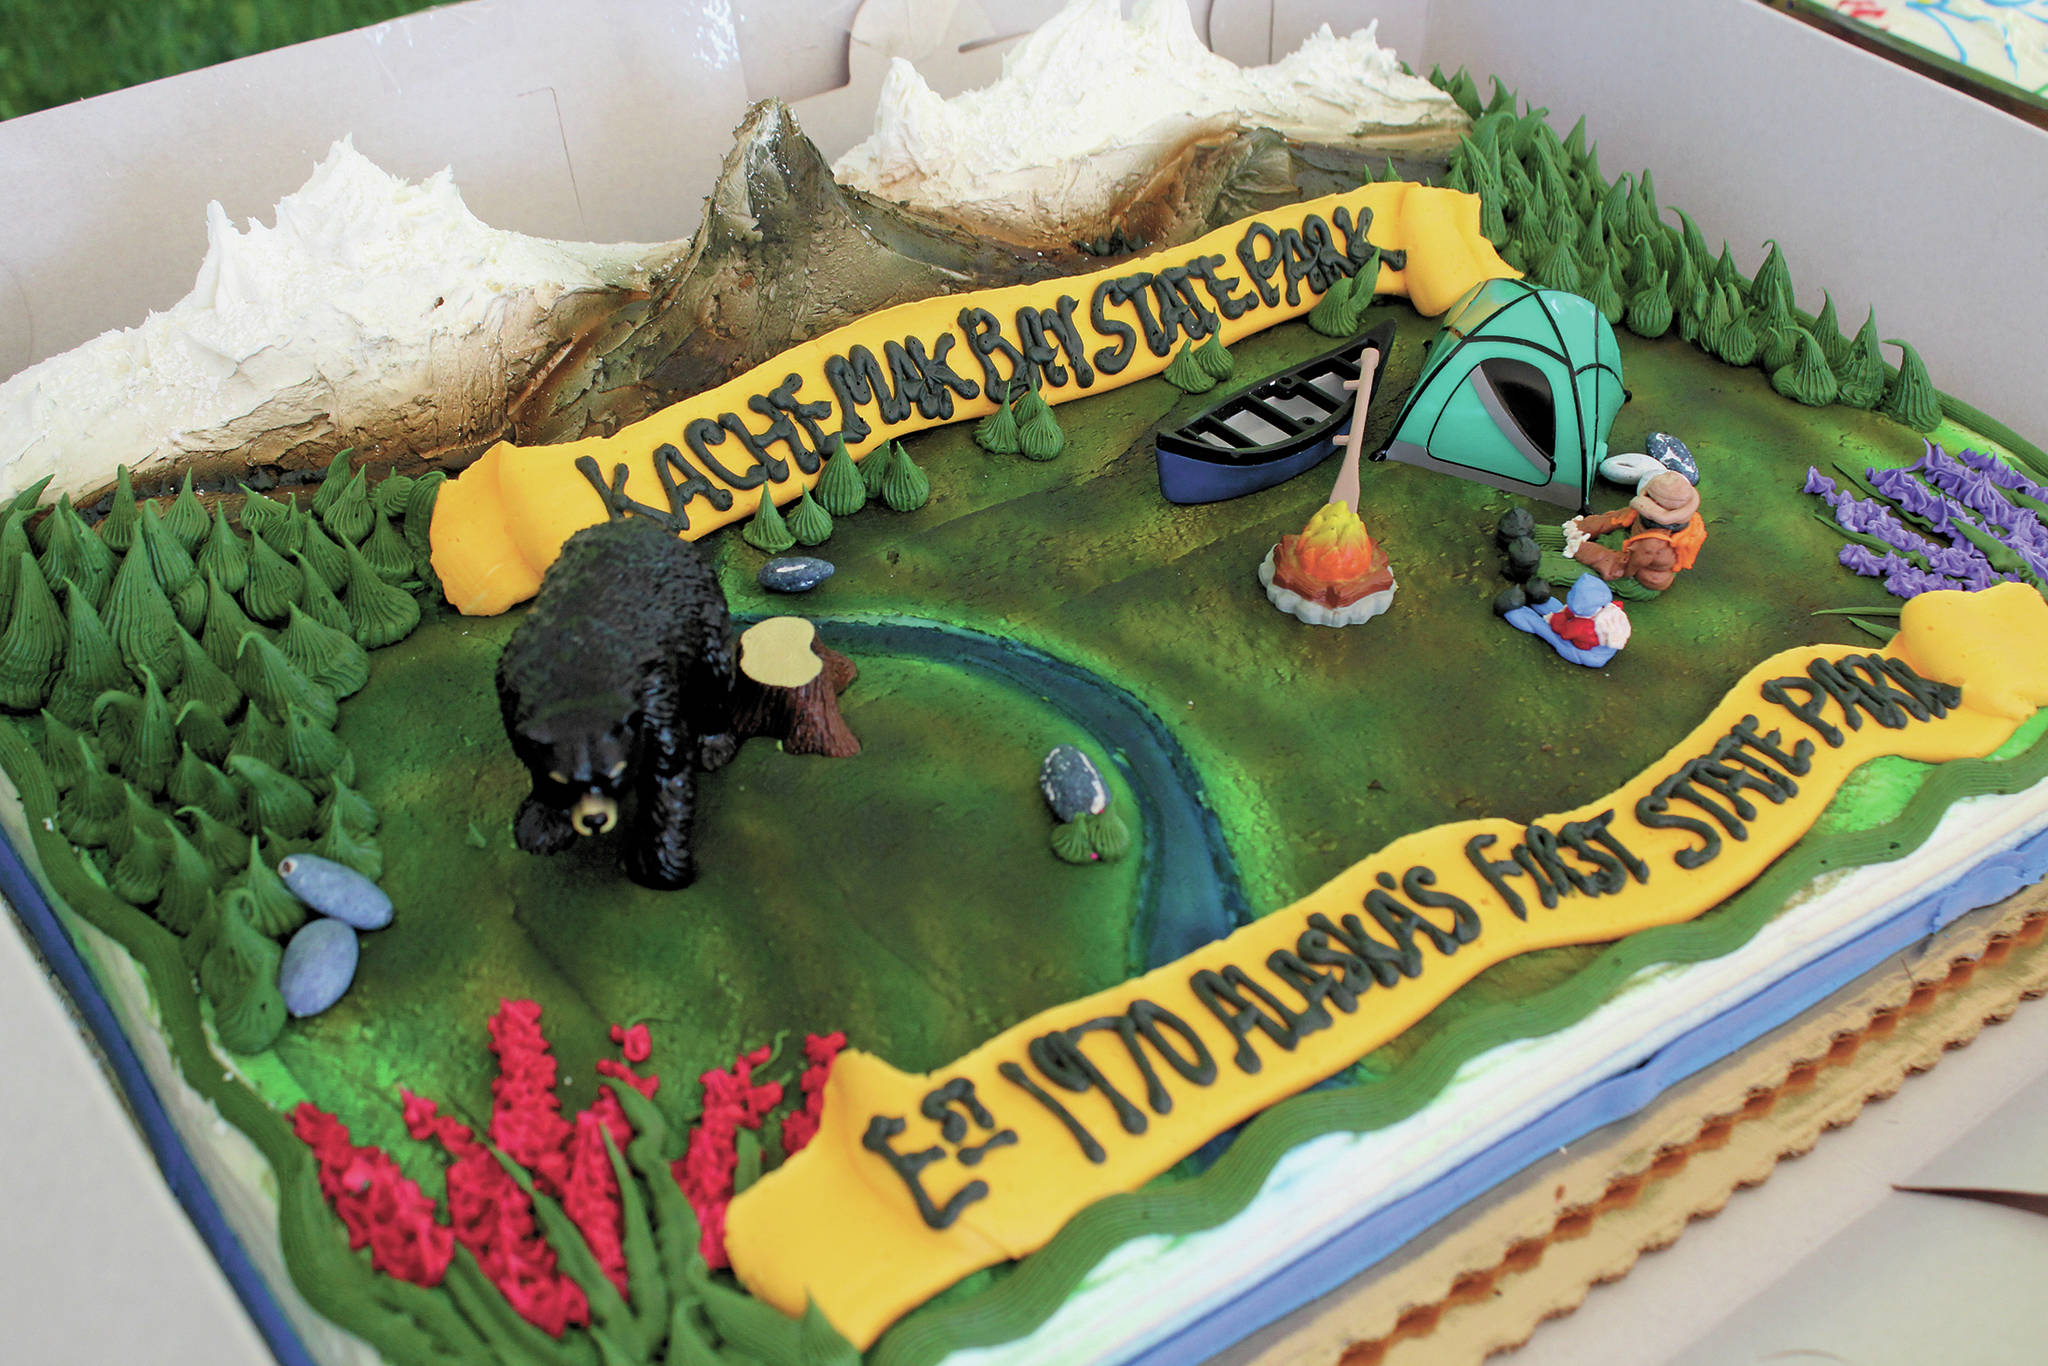 Kachemak Bay State Park gets belated 50th birthday party